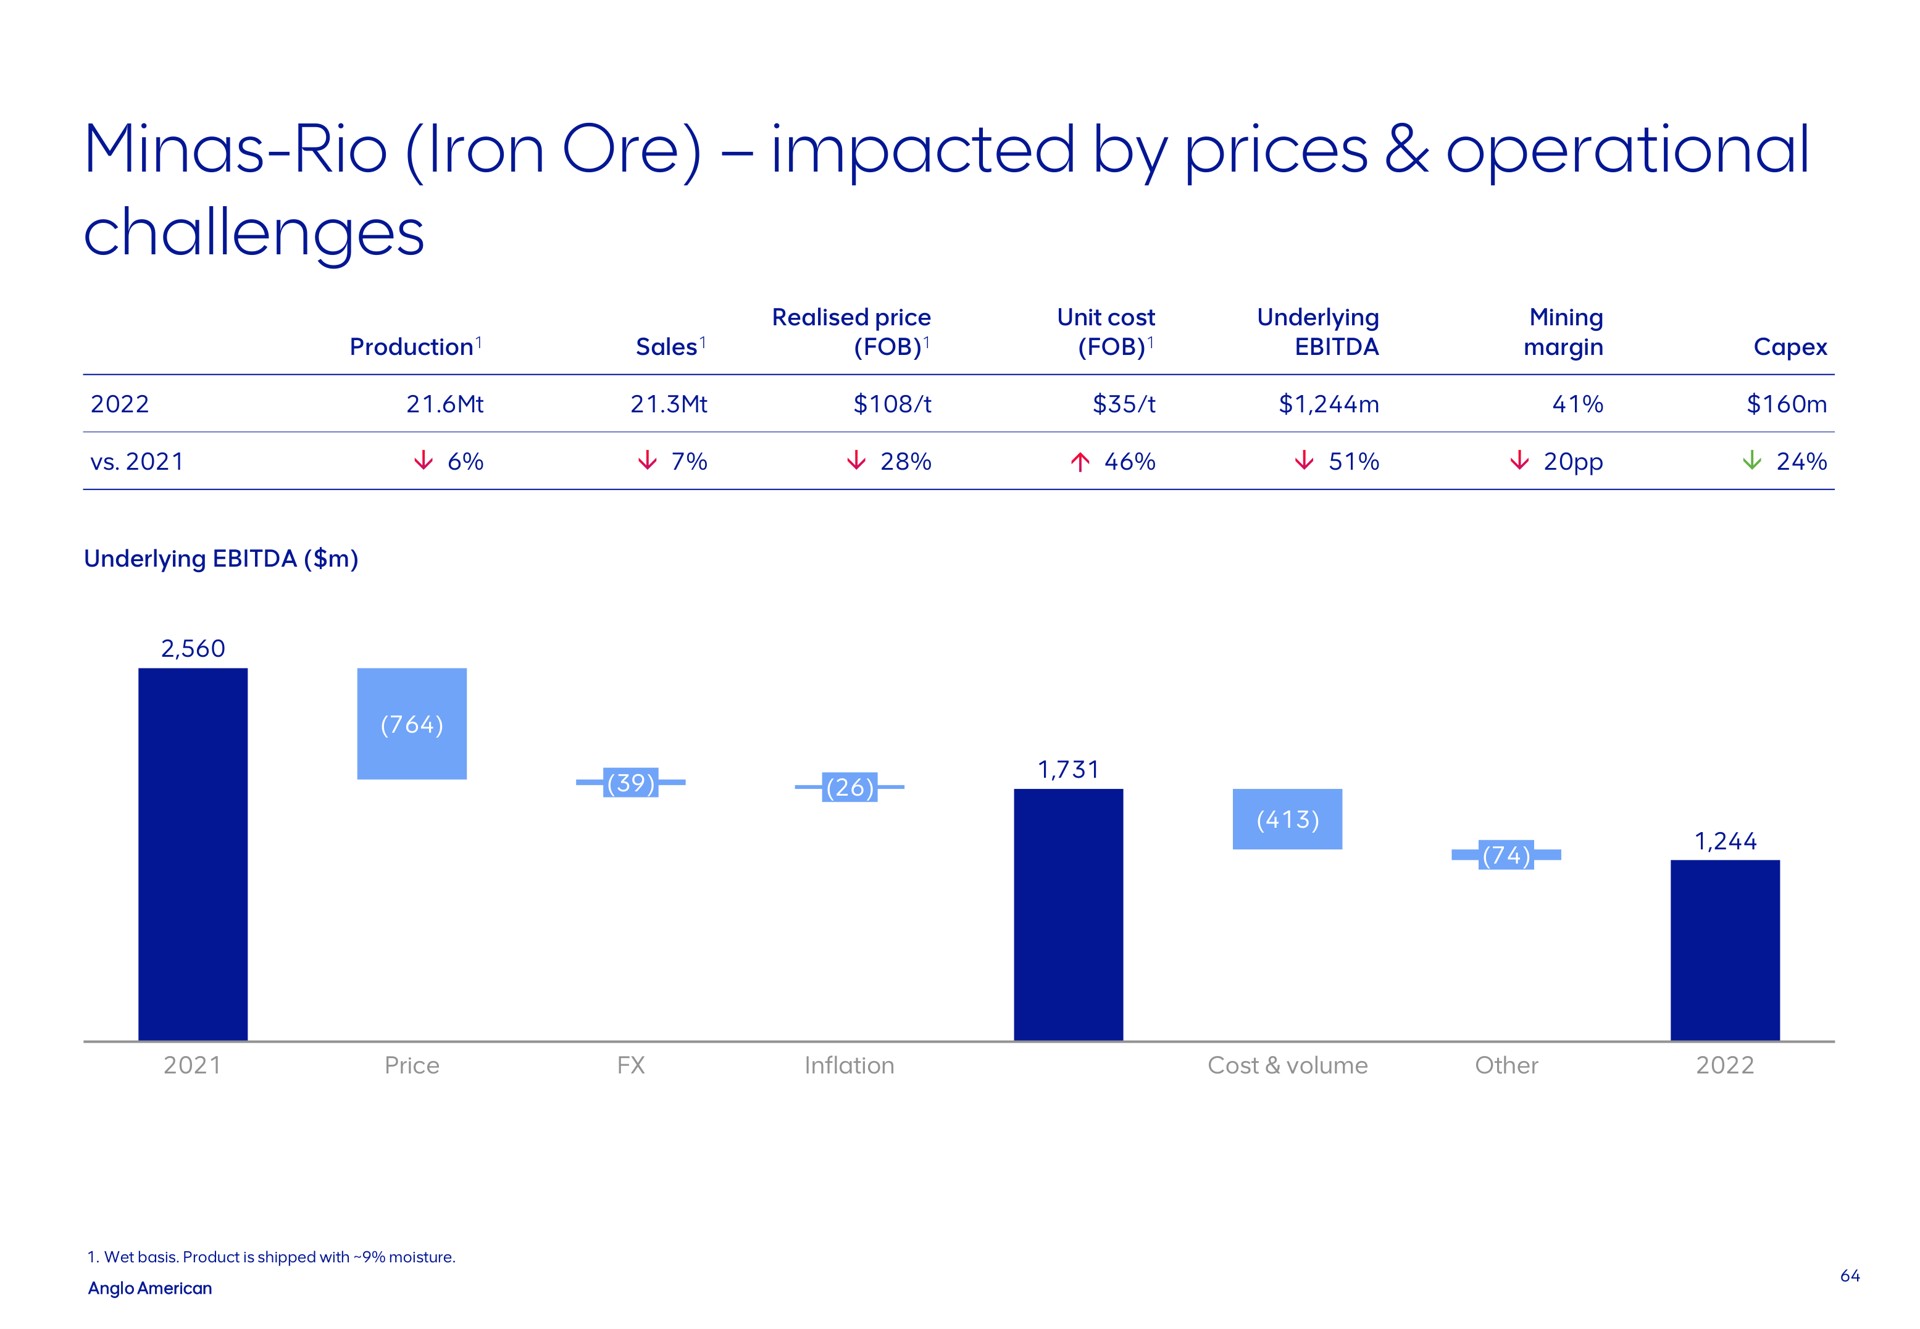 minas rio iron ore impacted by prices operational challenges | AngloAmerican